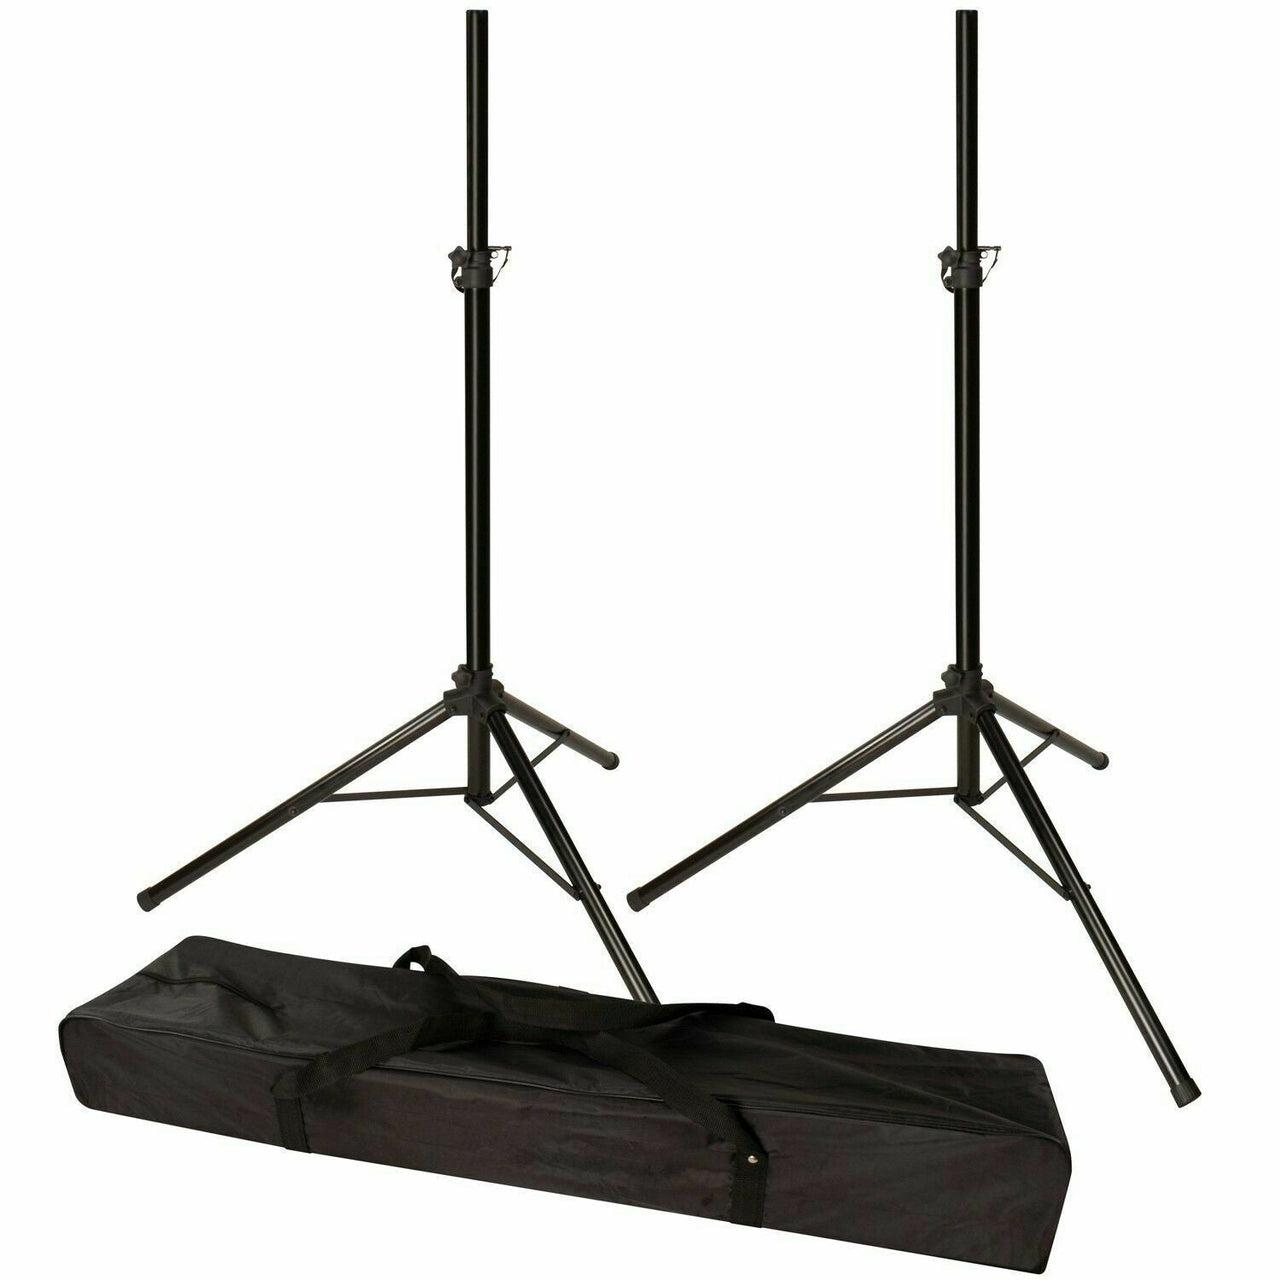 (2) MR DJ SS350B Speaker Stand with Road Carrying Bag Universal Black Heavy Duty Folding Tripod PRO PA DJ Home On Stage Speaker Stand Mount Holder with Road Carrying Bag